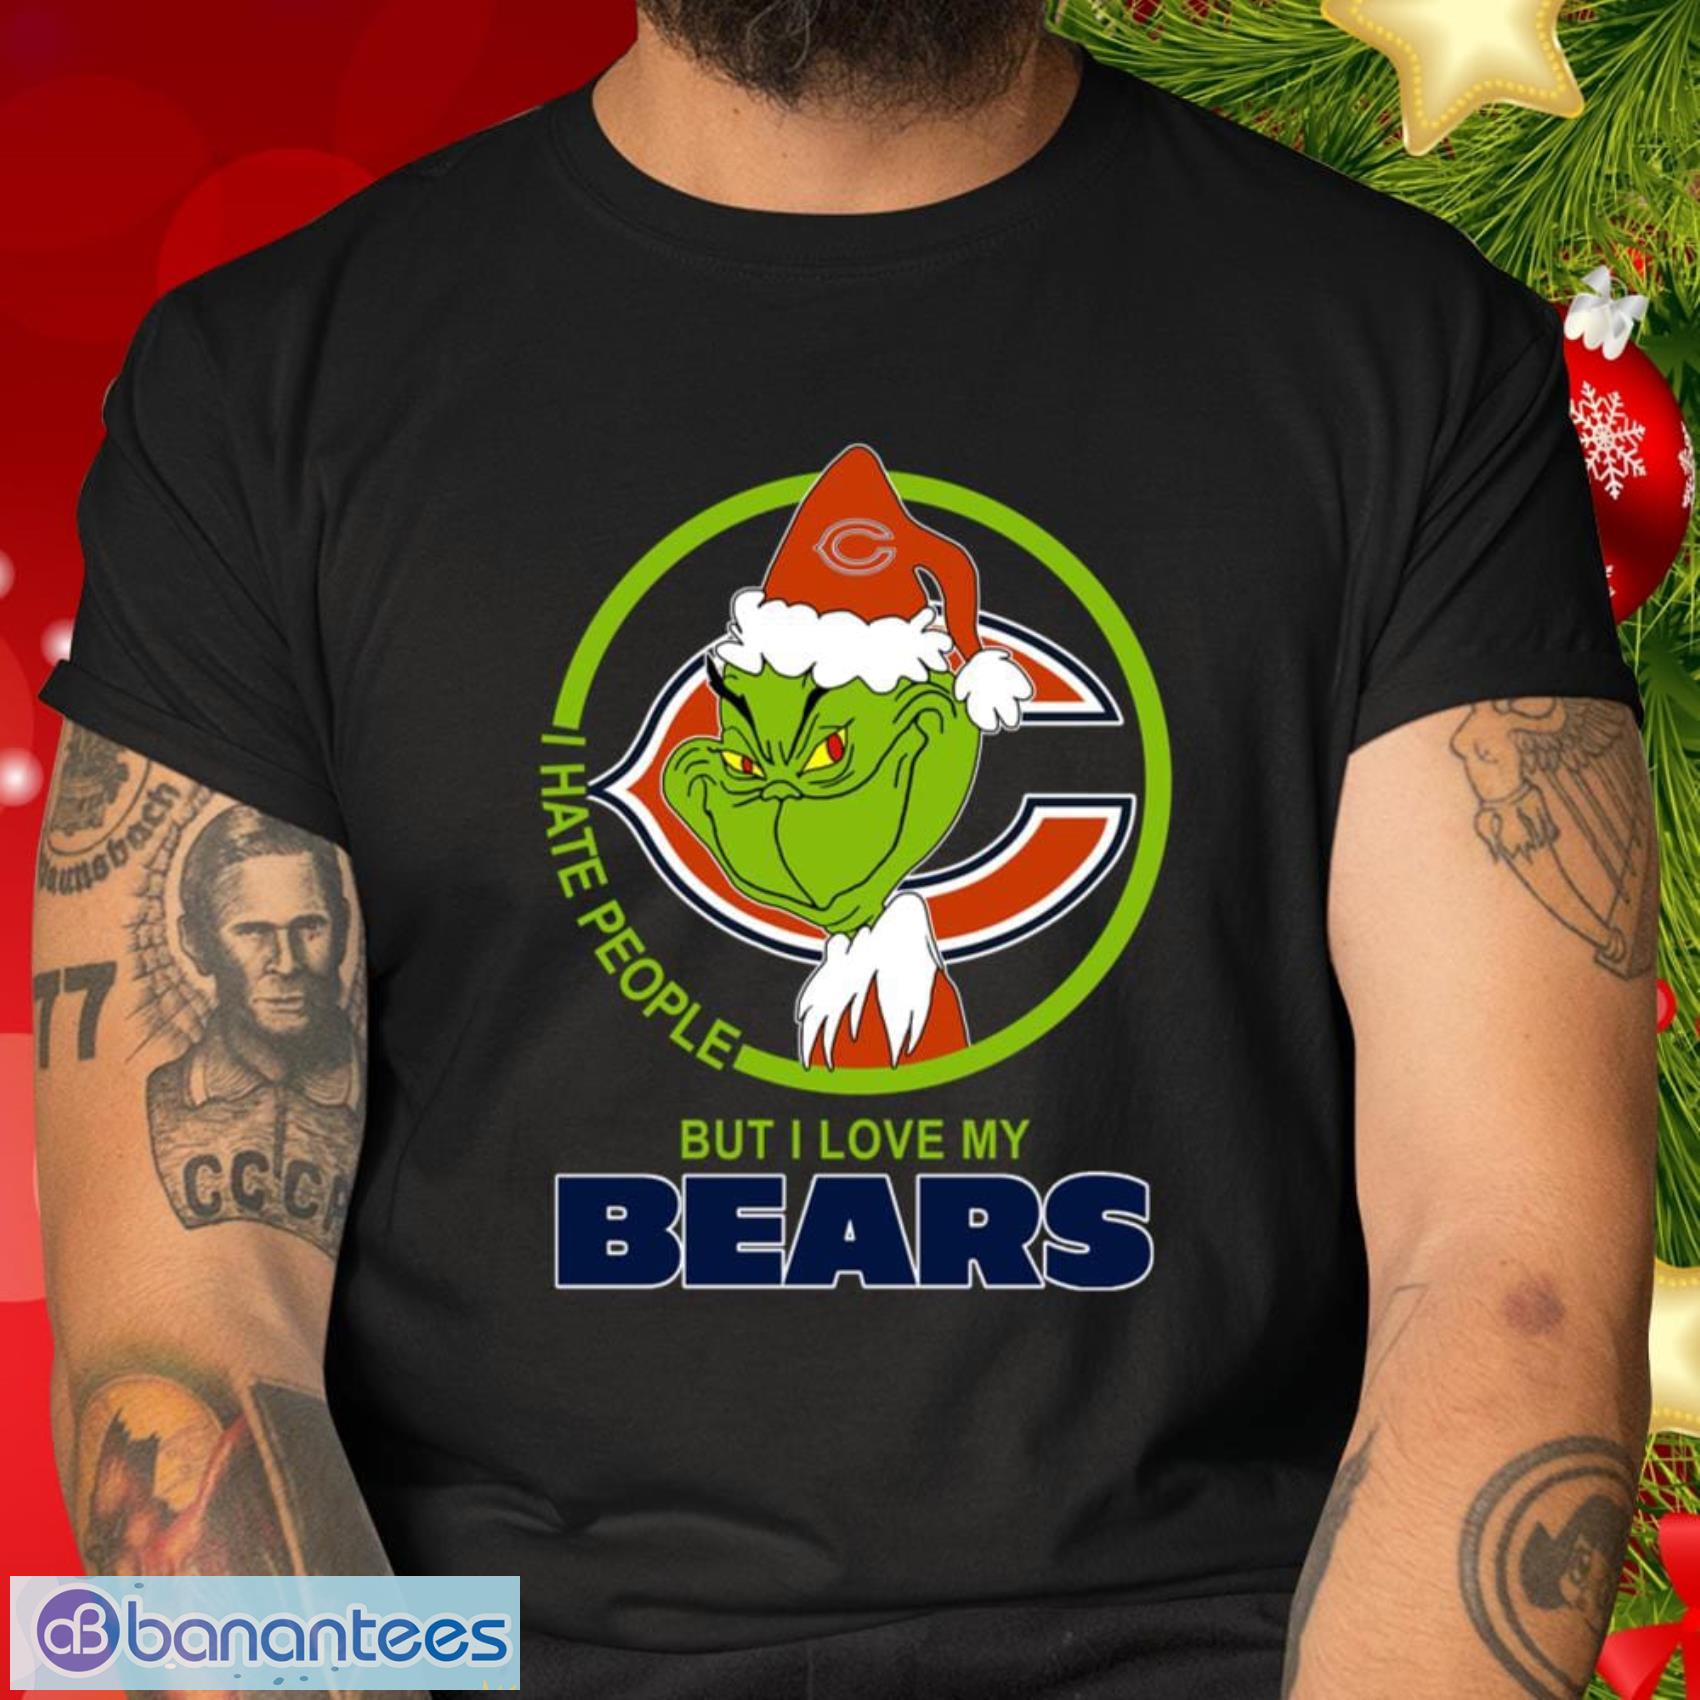 Chicago Bears NFL Christmas Grinch I Hate People But I Love My Favorite Football Team T Shirt - Chicago Bears NFL Christmas Grinch I Hate People But I Love My Favorite Football Team T Shirt_1